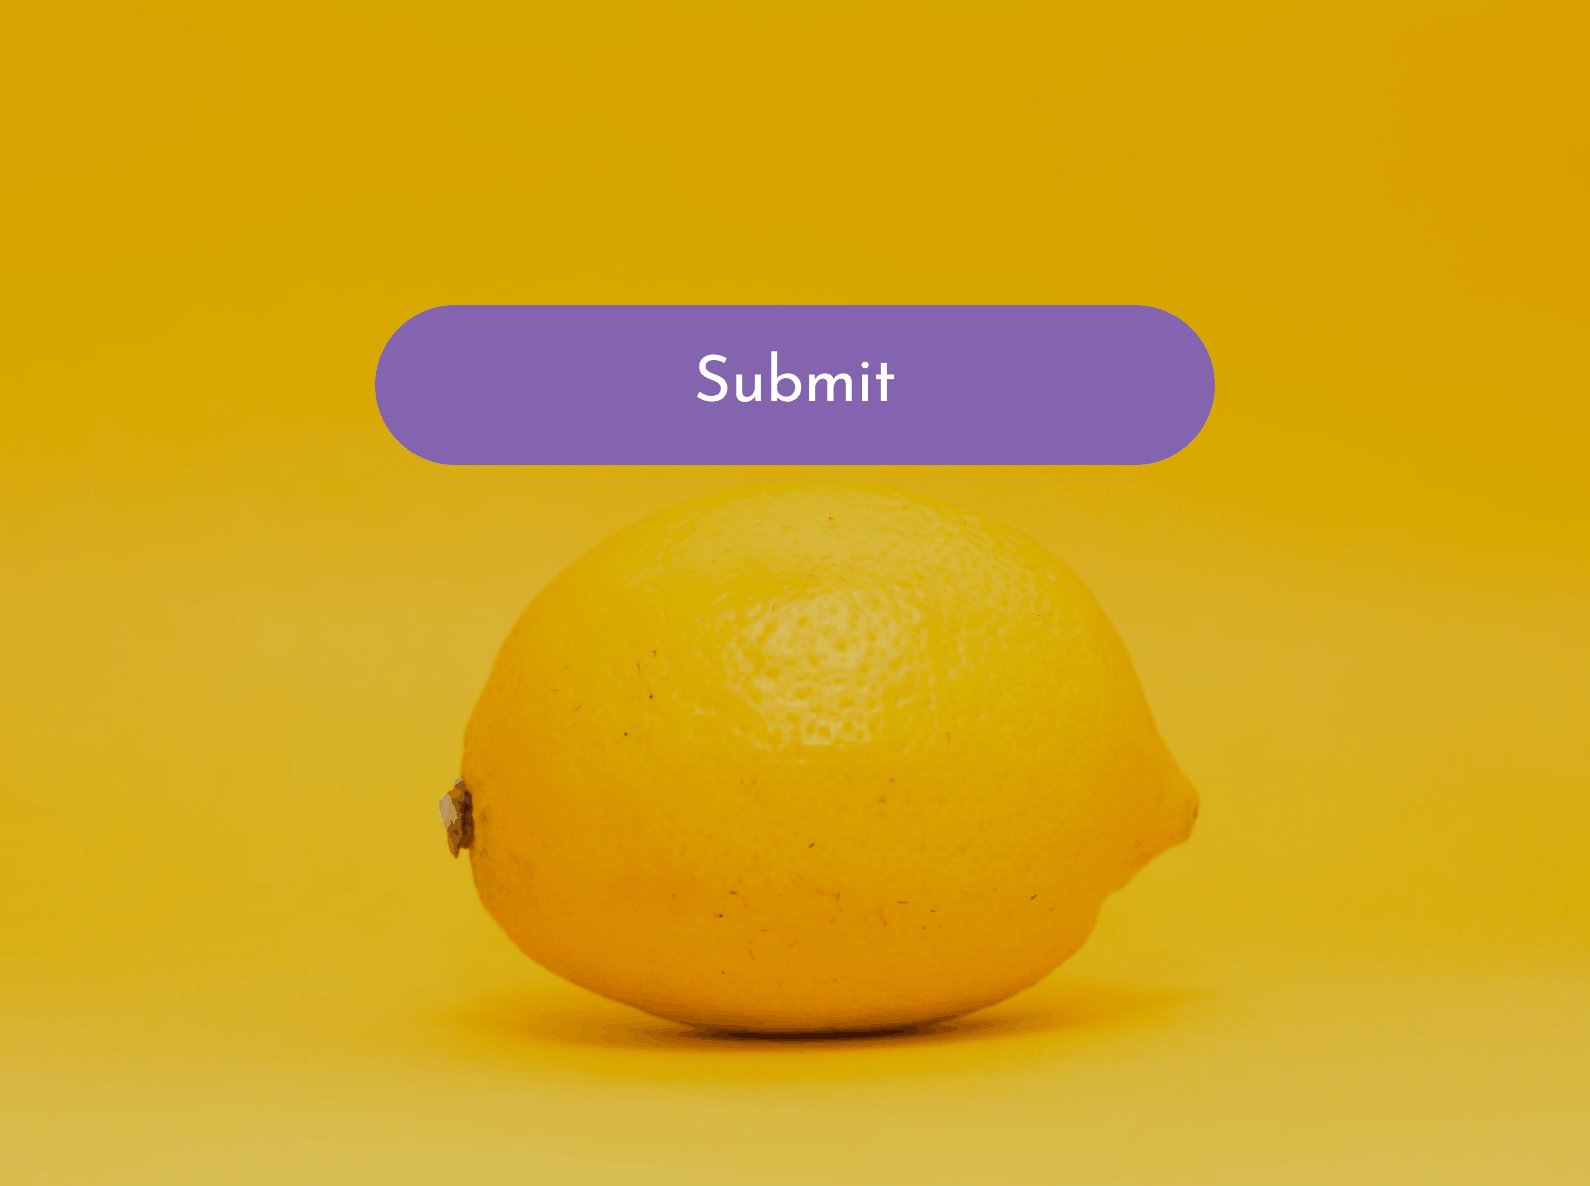 Hover on “Submit” button, click, display spinner, then show success page